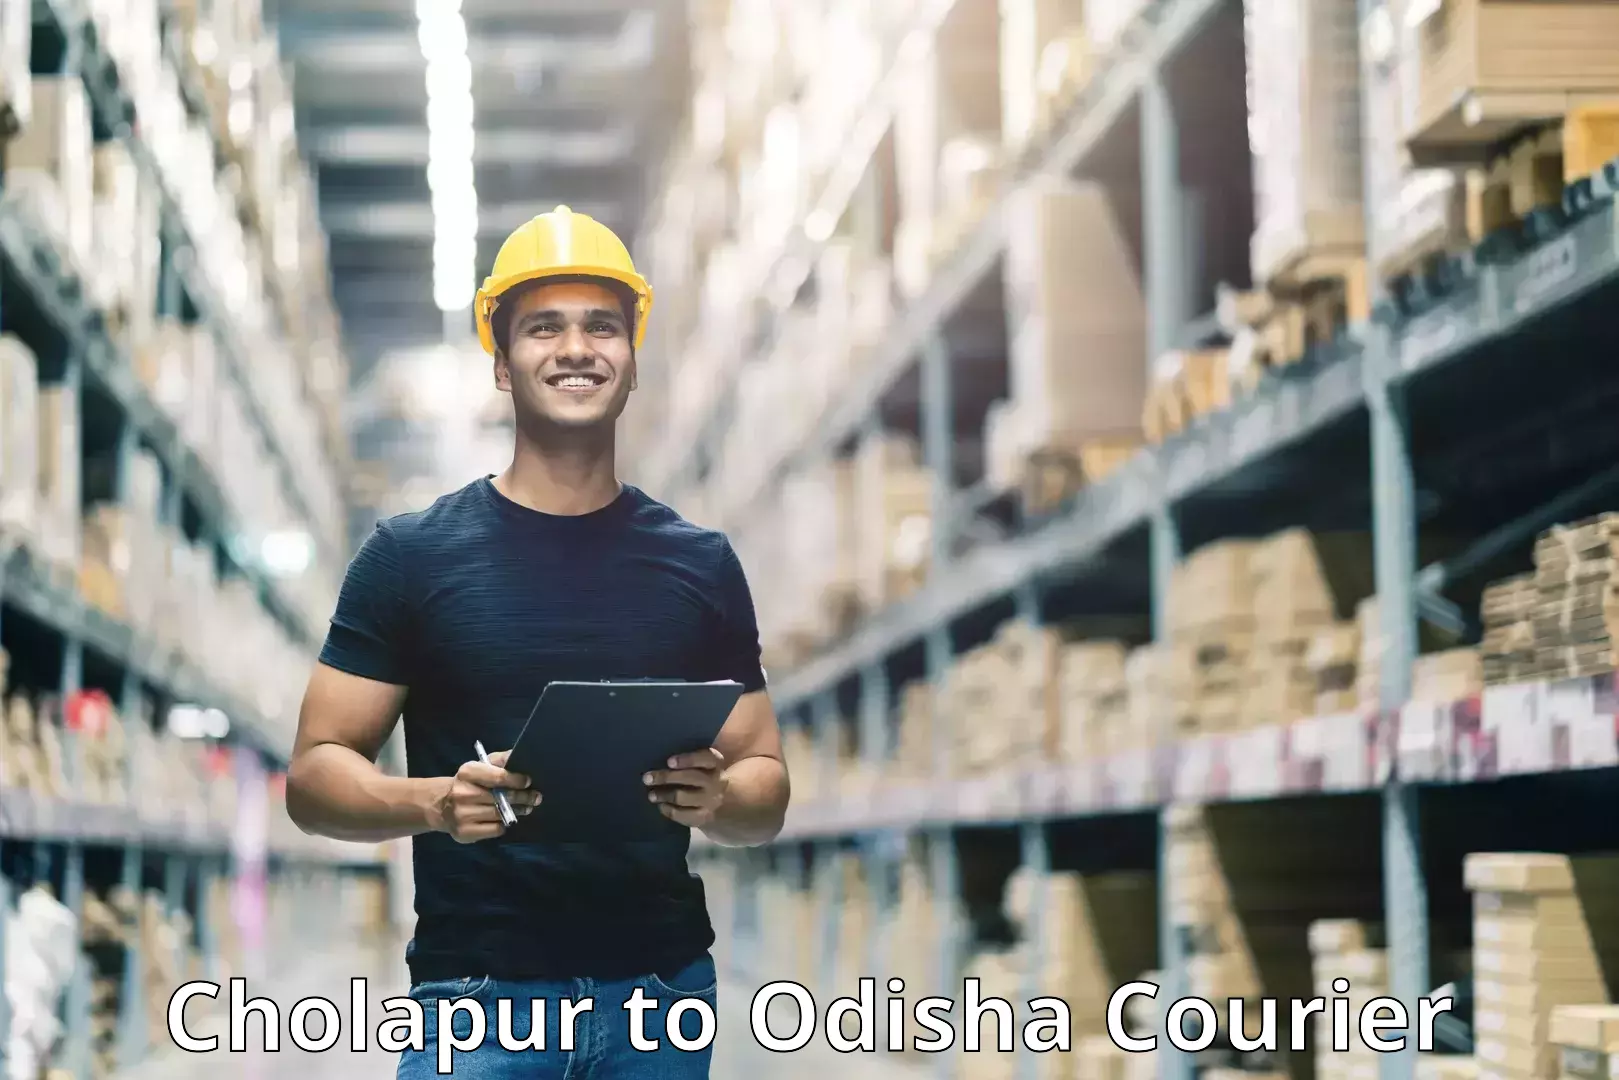 State-of-the-art courier technology Cholapur to Paikana